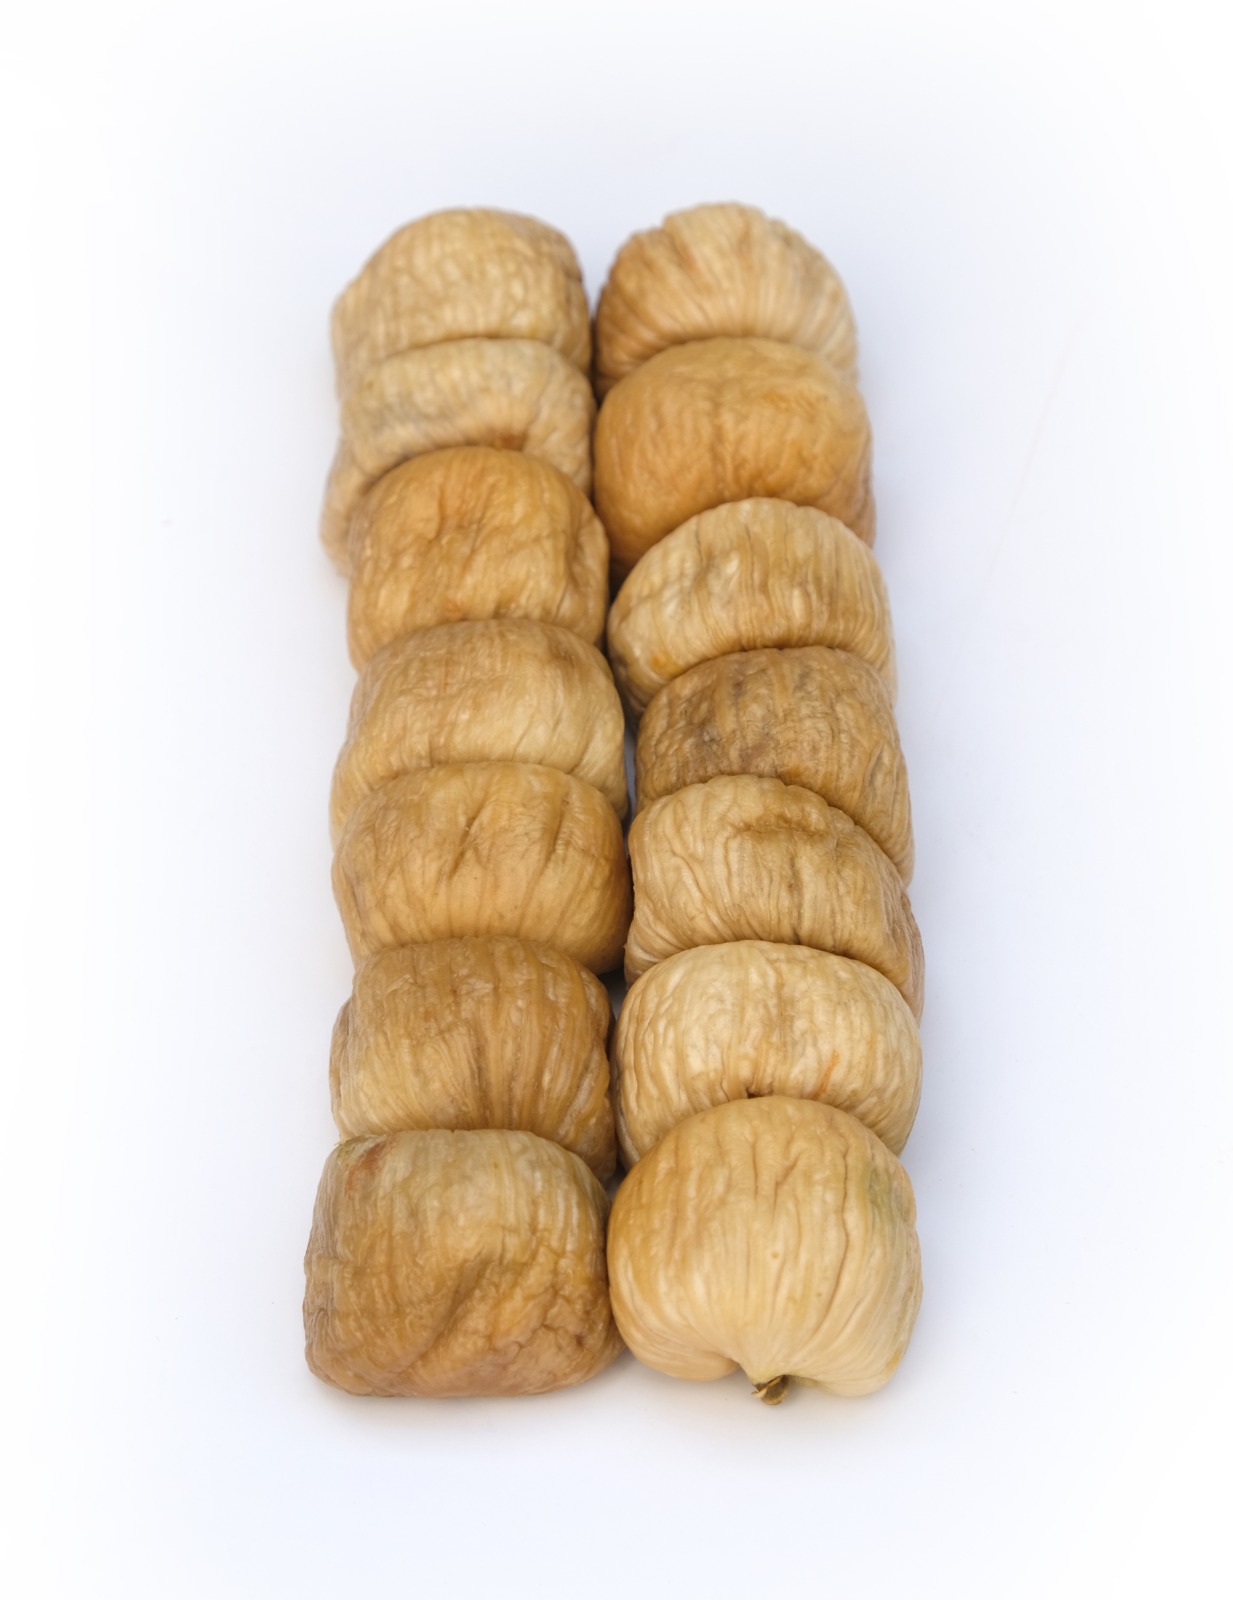 05- PULLED Dried Figs